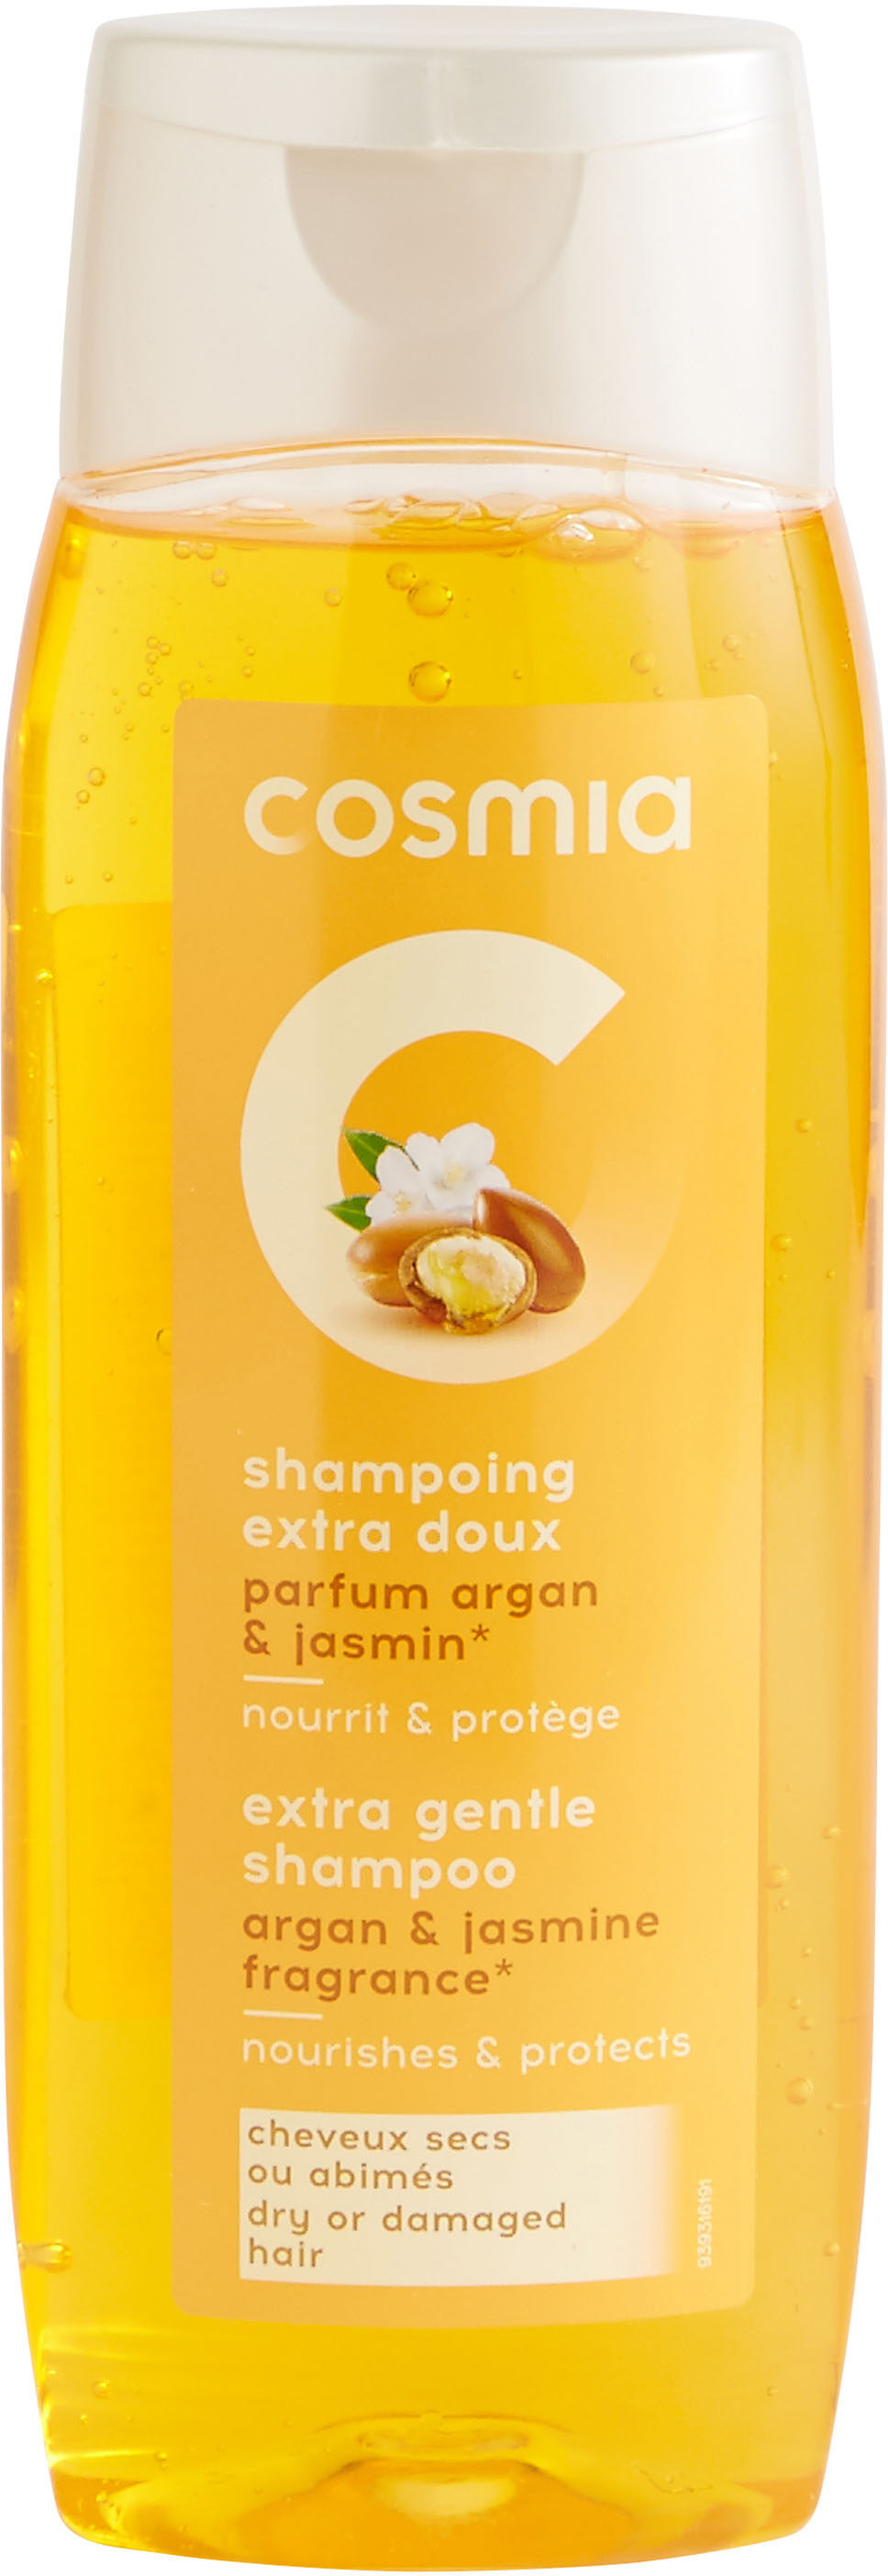 Shampoing extra doux - Product - fr